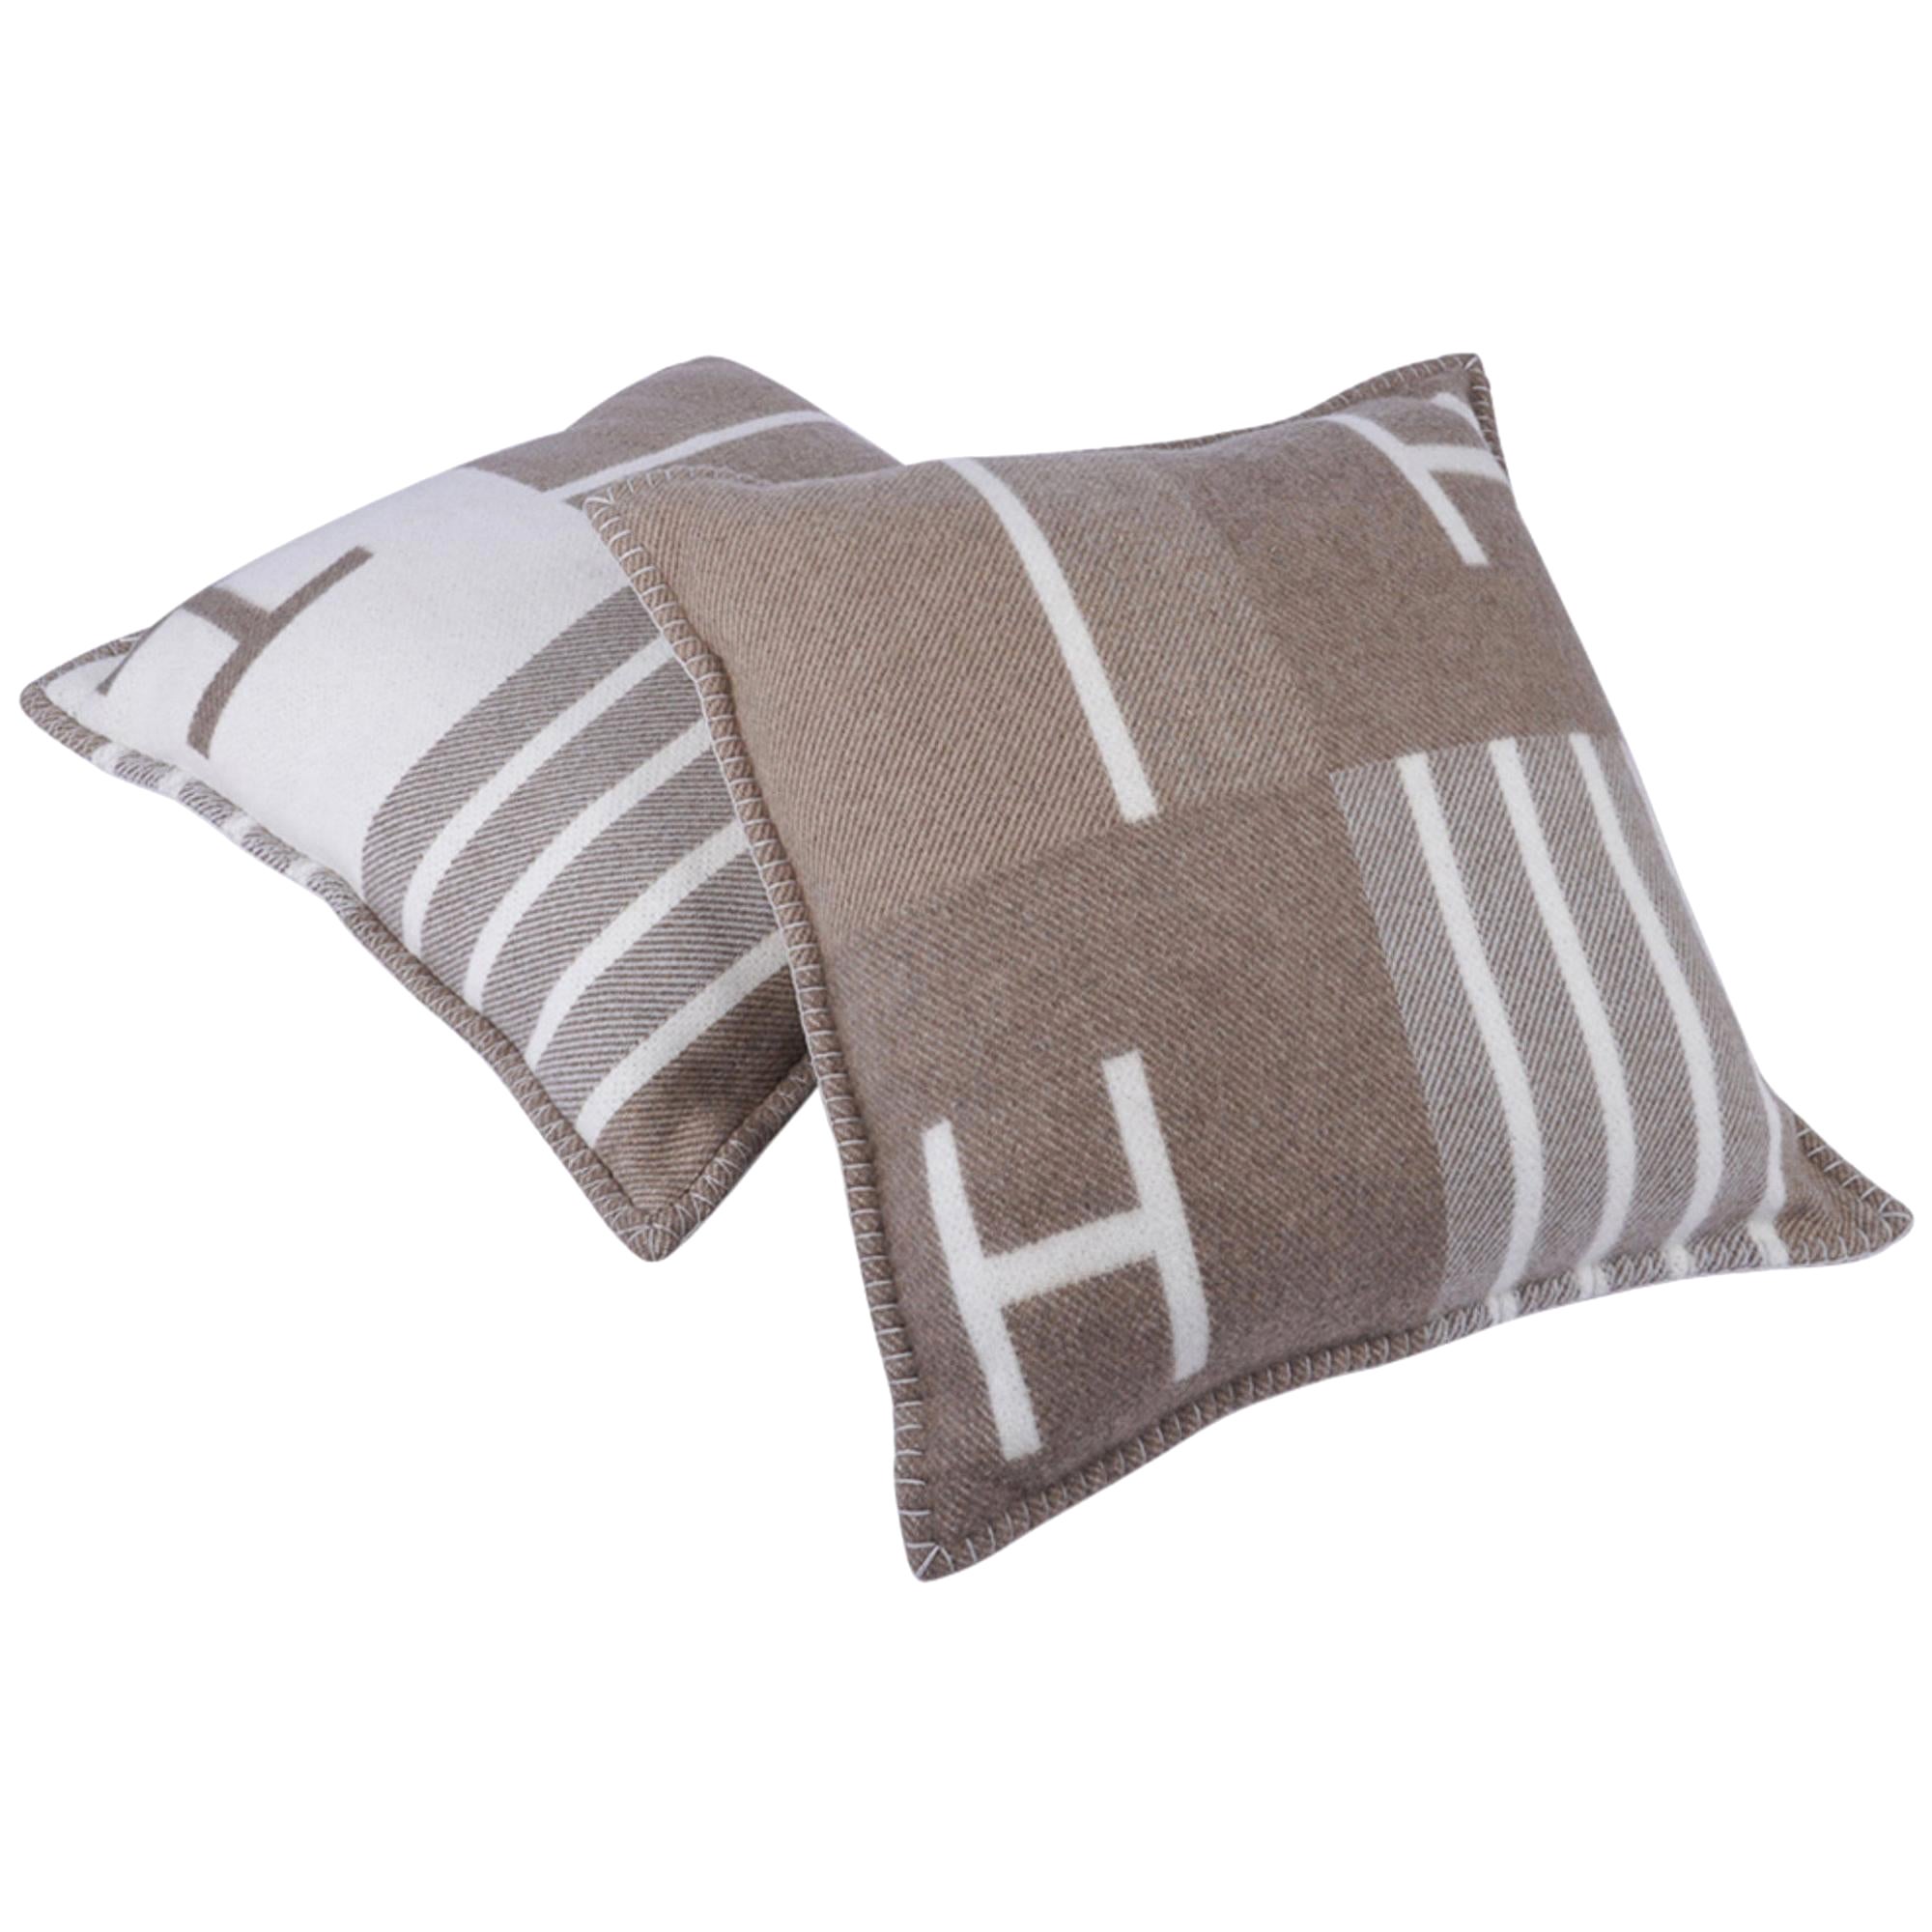 Hermes Avalon Vibration Pillow Naturel Set of Two Limited Edition For Sale